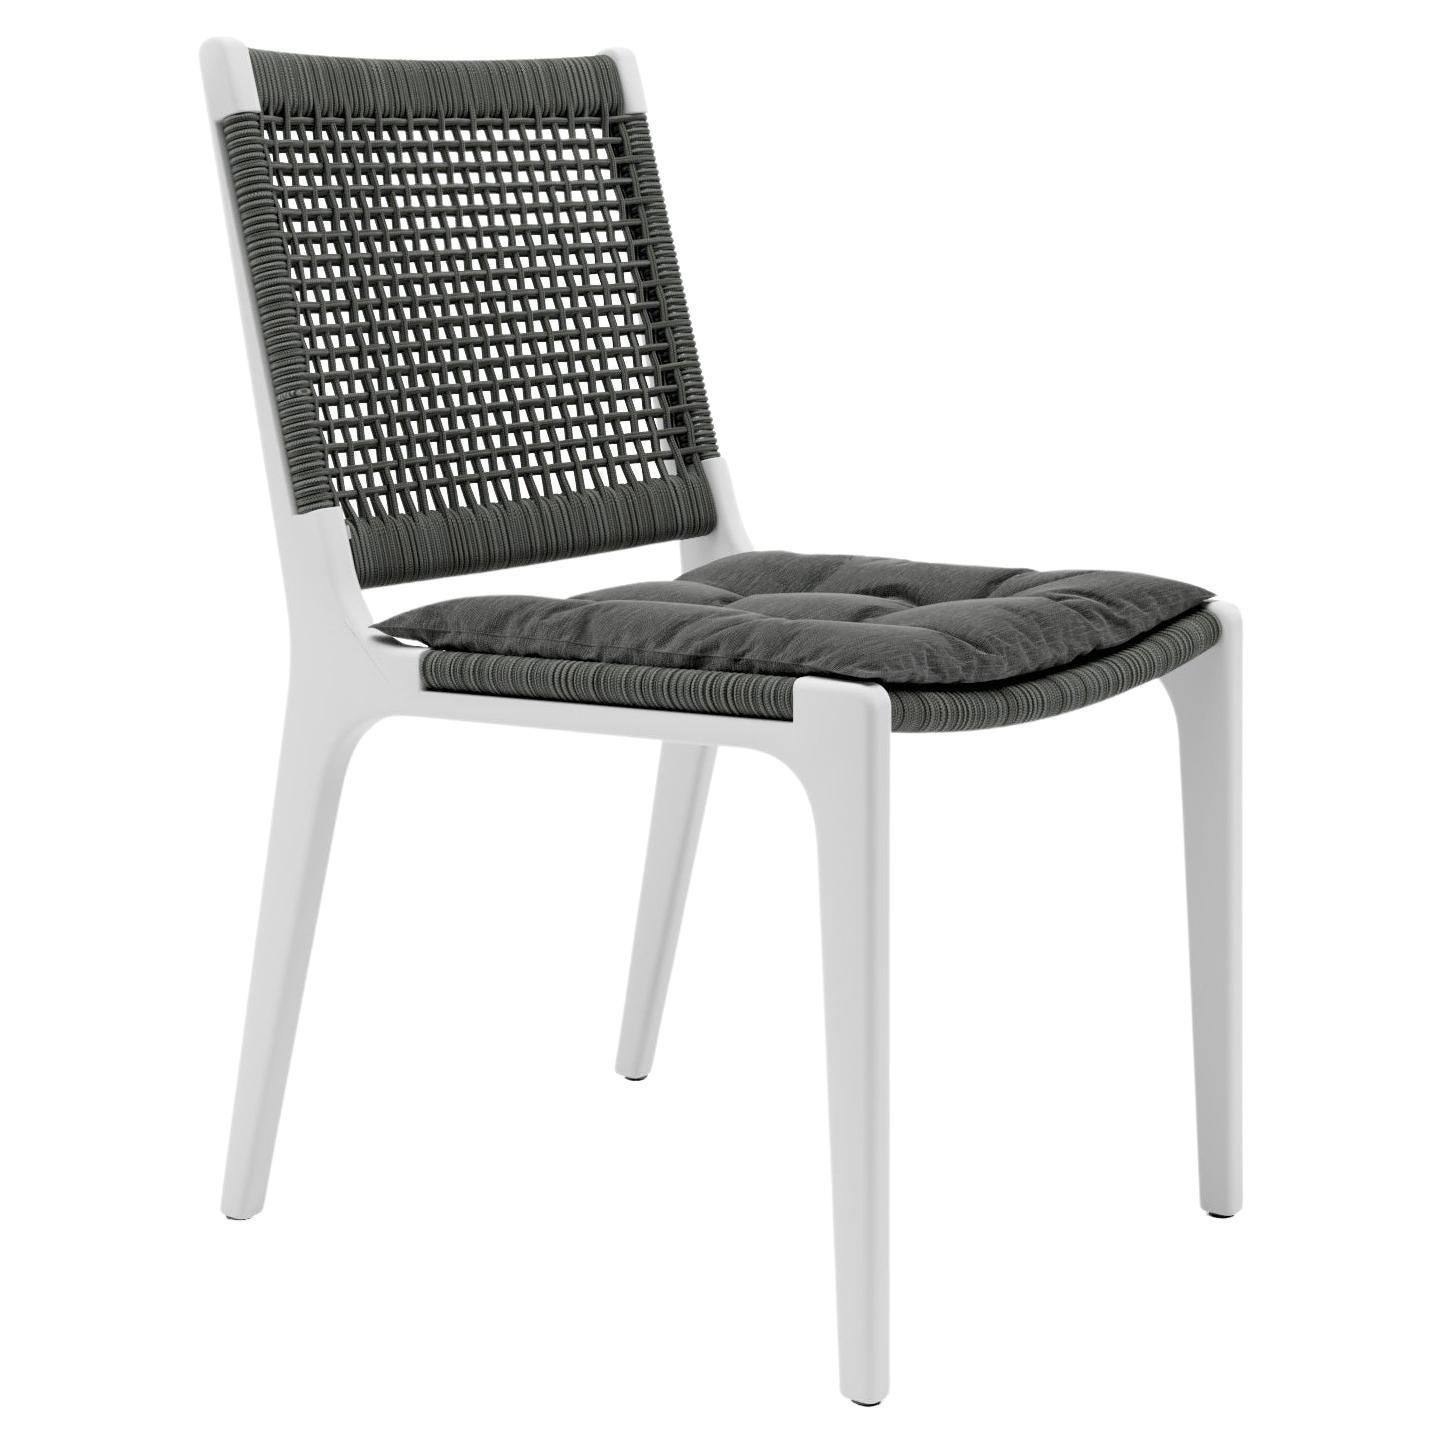 Modern and minimalist in design. The powder-coated aluminum frame in combination with the open and straight-lined rope weave make this dining chair the perfect casual outdoor collection.
See photos for cushion , base and weaving colors. 
Contact